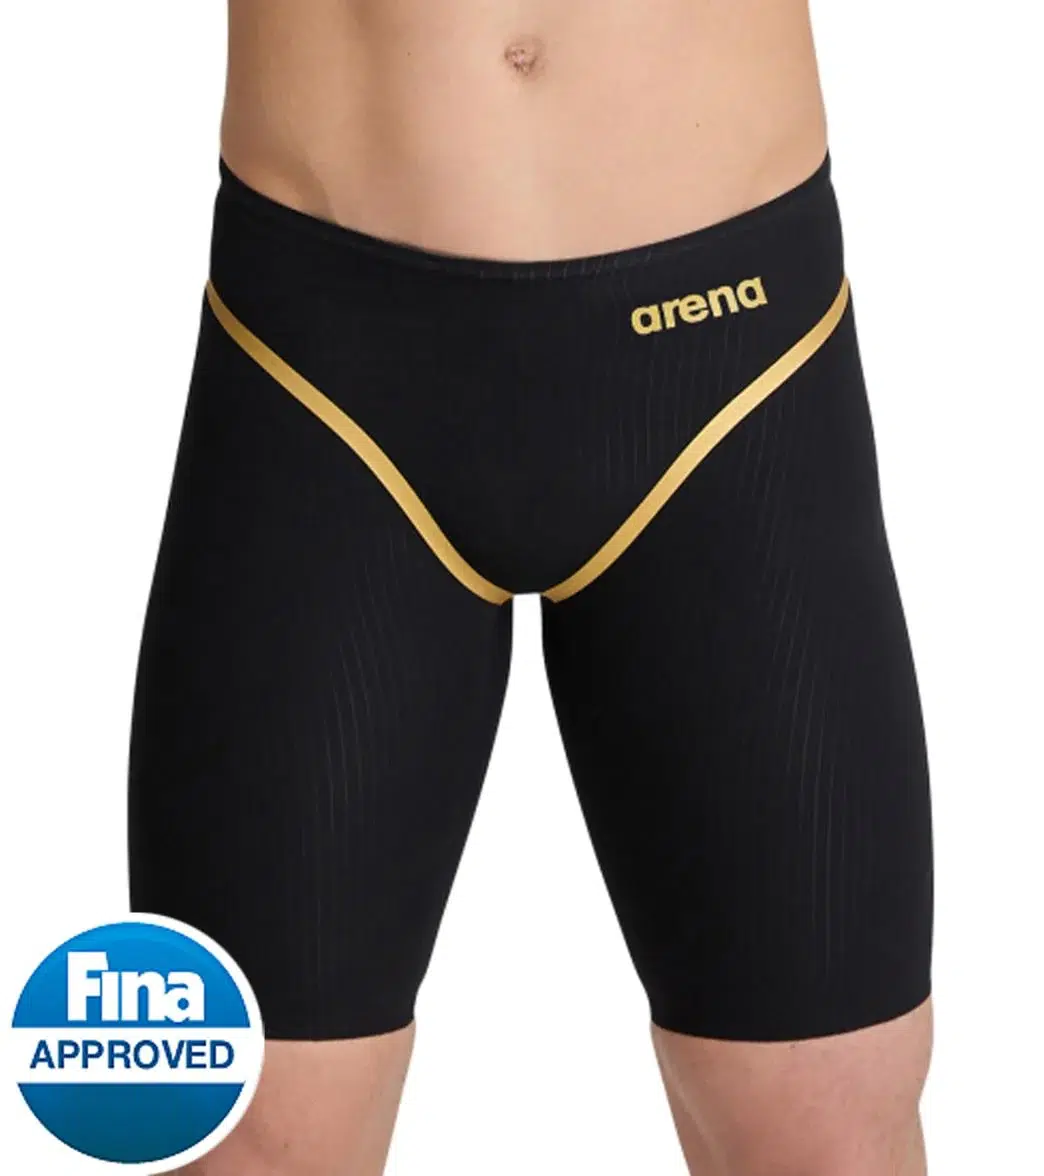 Arena Mens Powerskin Carbon Core Swimsuit - Best Gifts For Swimmers